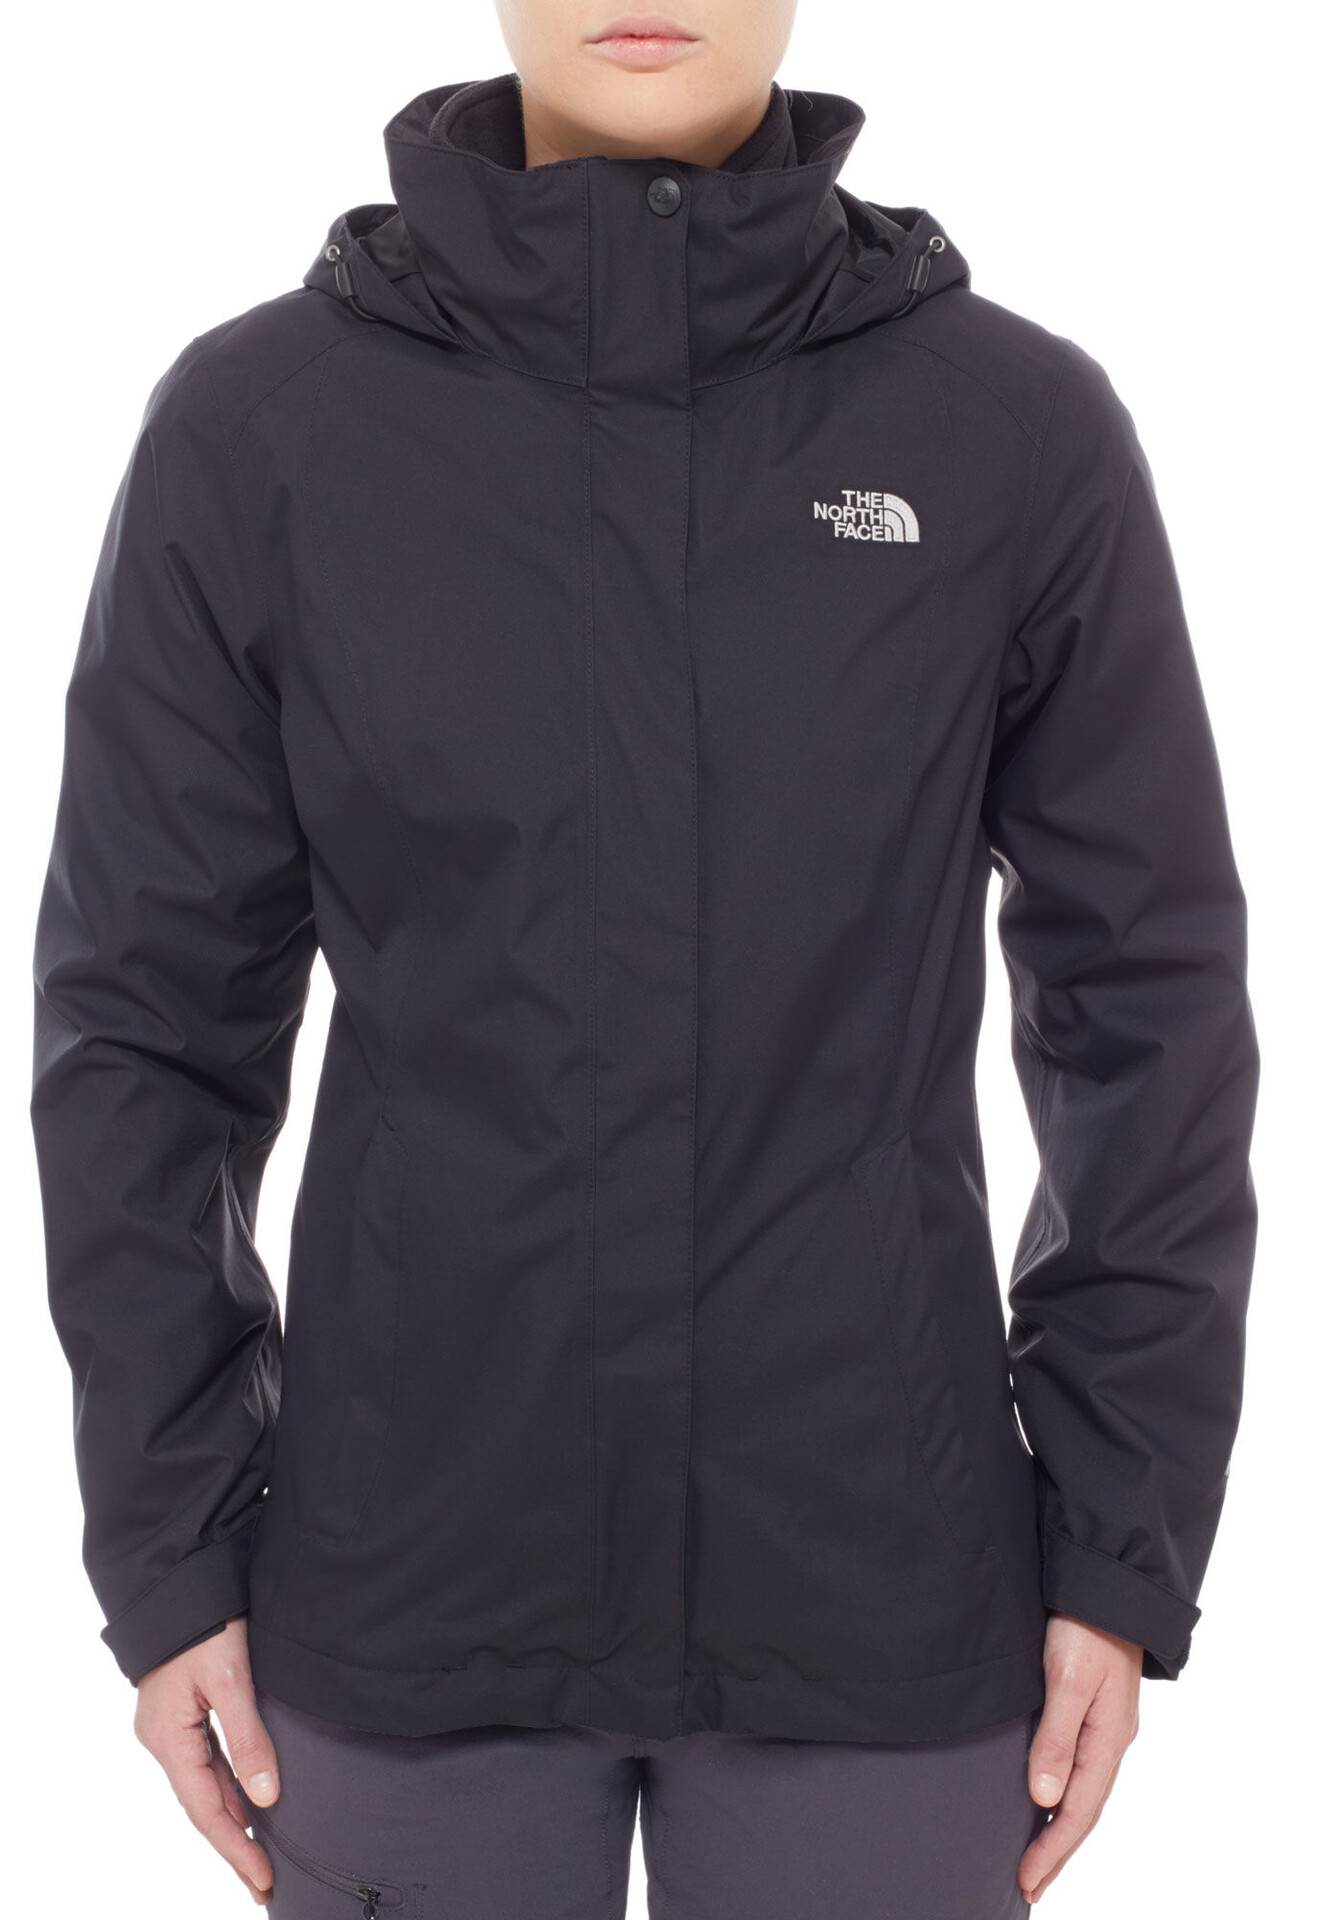 north face triclimate jacket women's sale